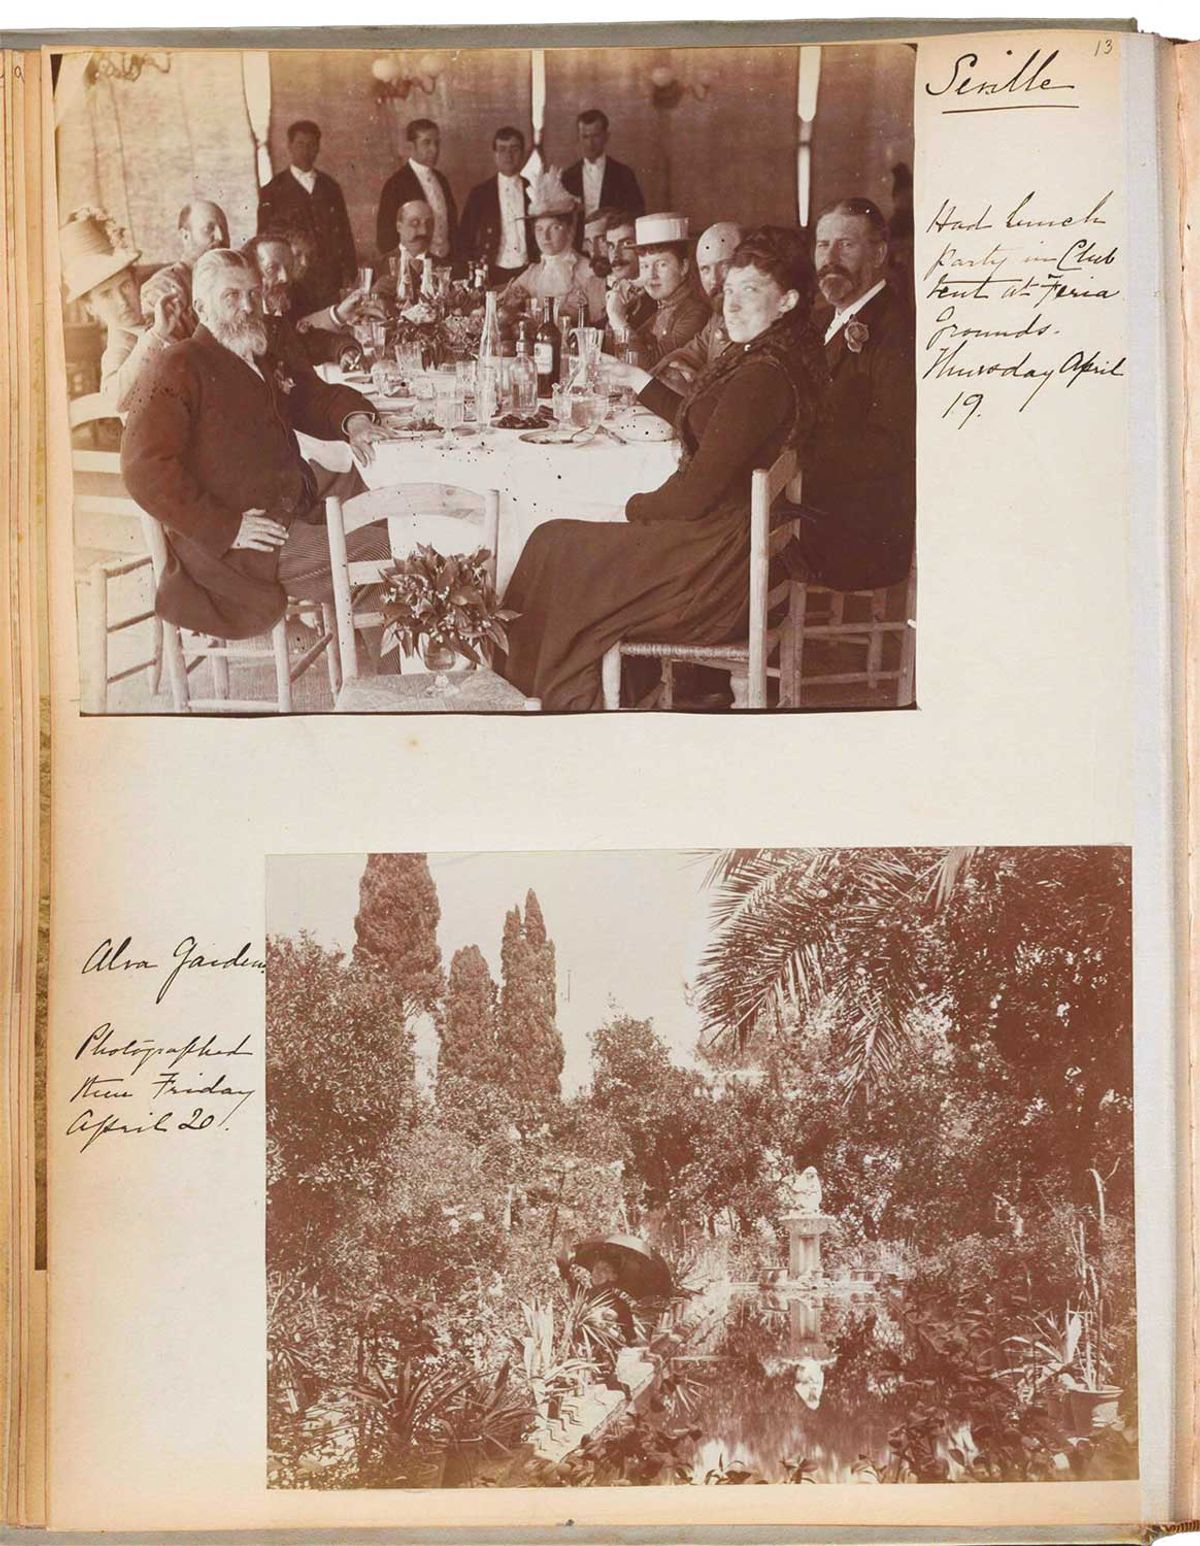 Travel albums of the American collector and philanthropist Isabella Stewart Gardner (1840-1924). This page from 1888 shows images from Spain and Portugal. The albums include collected photographs, found papers, pressed botanicals and annotations

Courtesy Isabella Stewart Gardner Museum, Boston